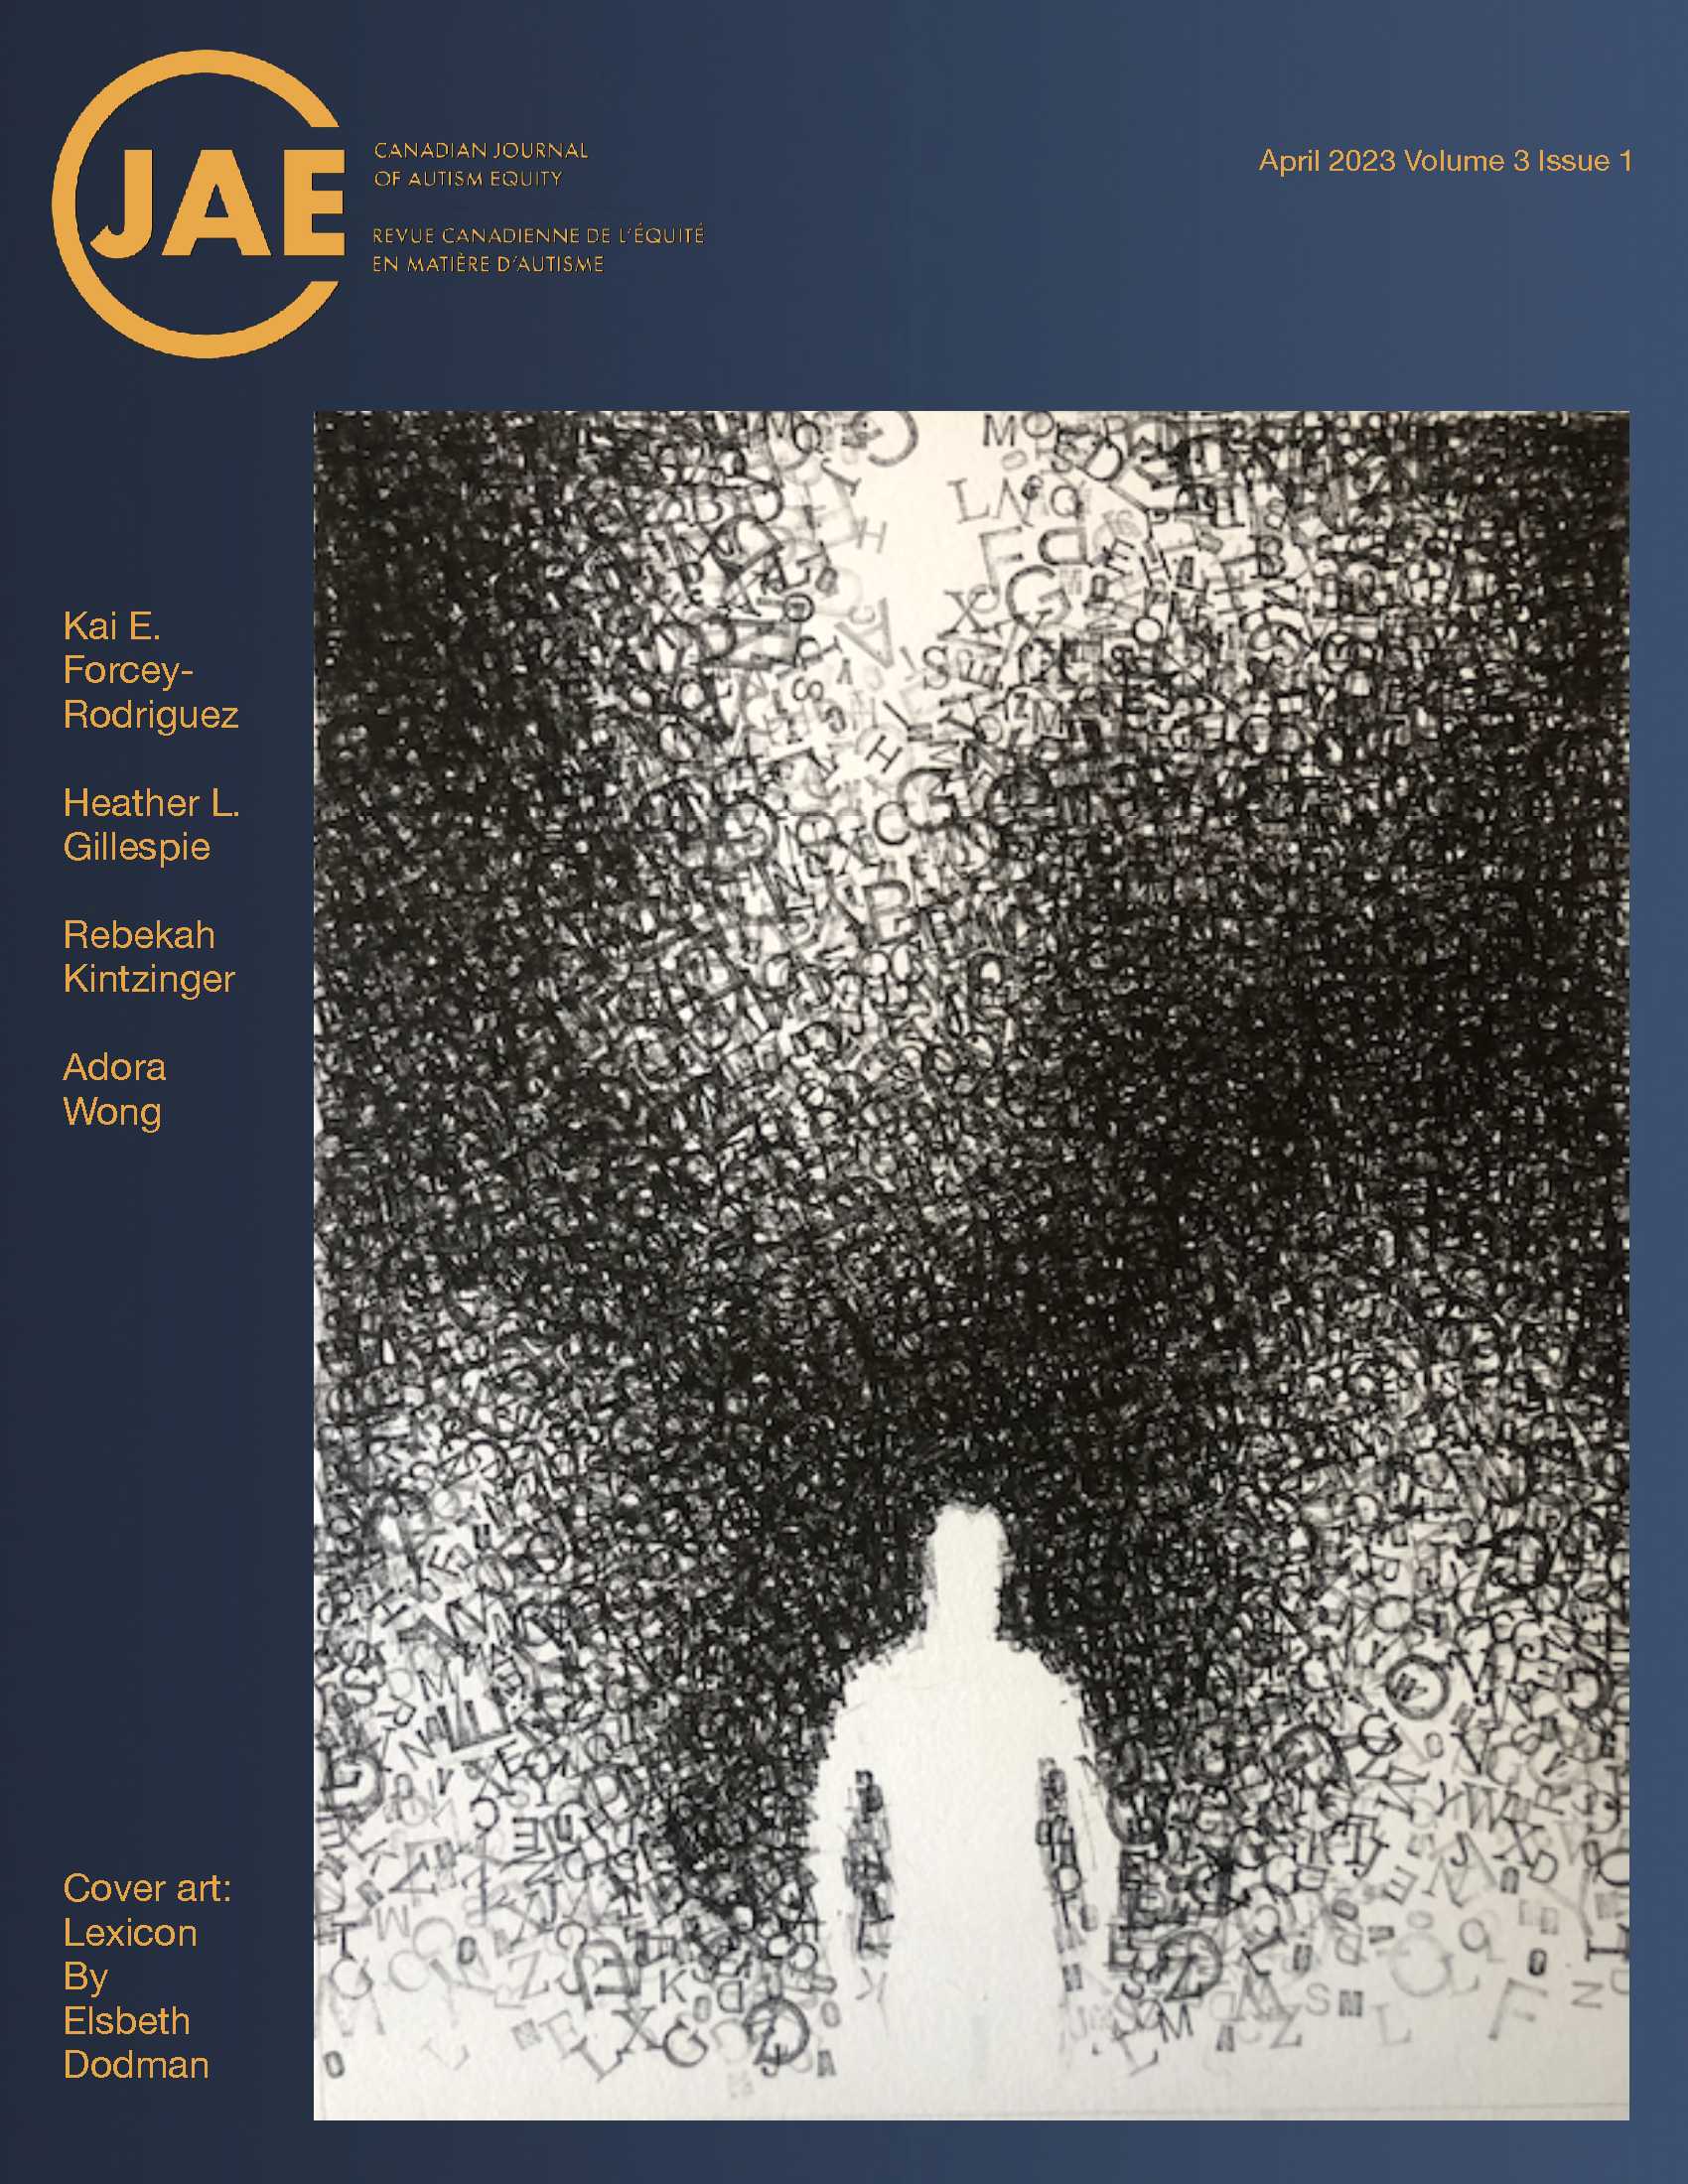 Artwork by Elsbeth Dodman titled "Lexicon".  Surrounded by a yellow border with the CJAE logo, a list of author's names and April 2023 Volume 3 Issue 1.